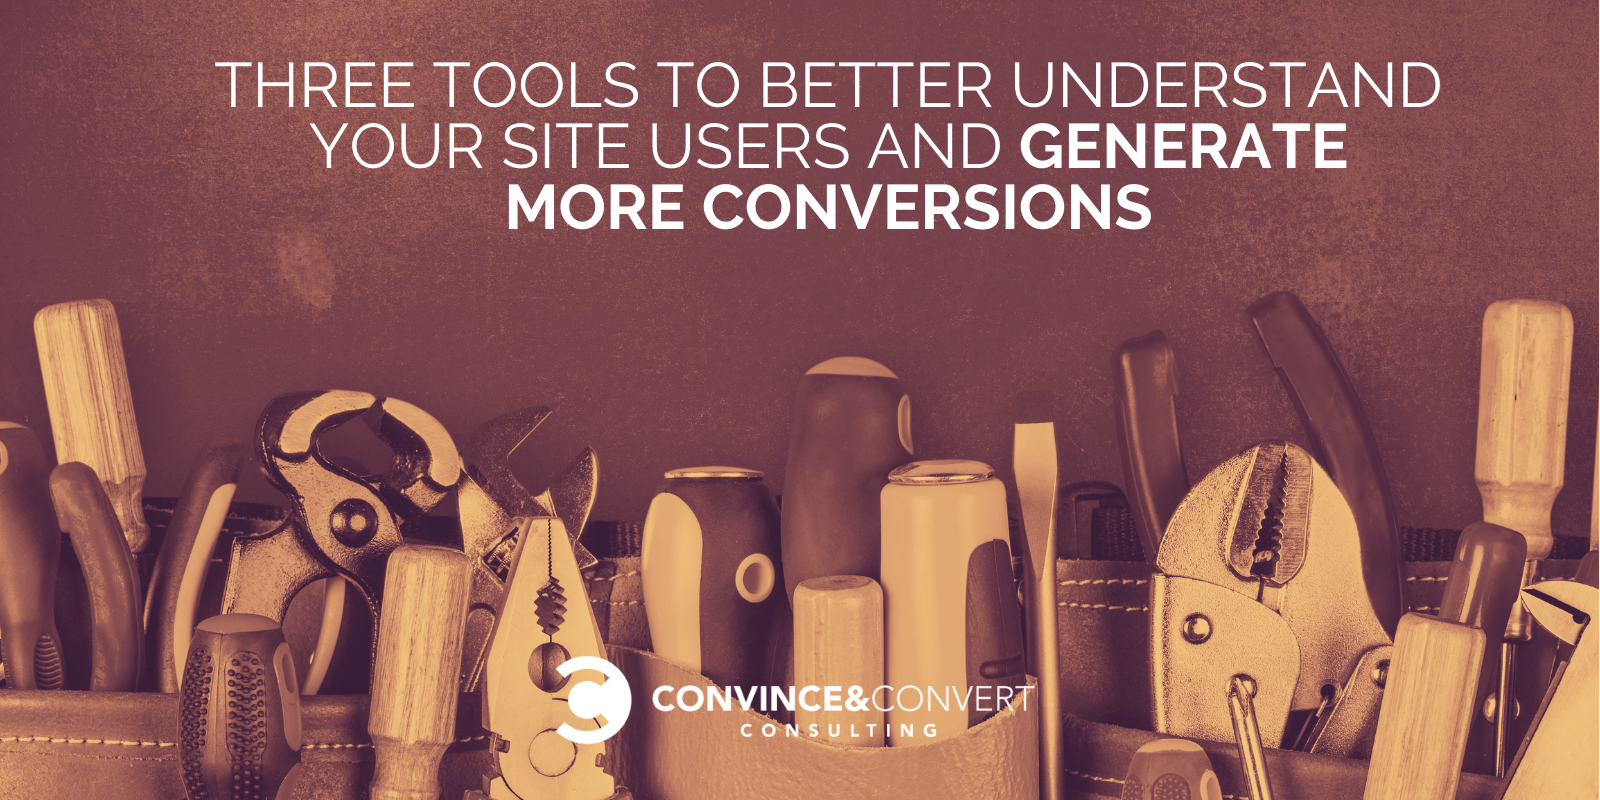 Three Tools to Better Understand Your Site Users and Increase Conversions